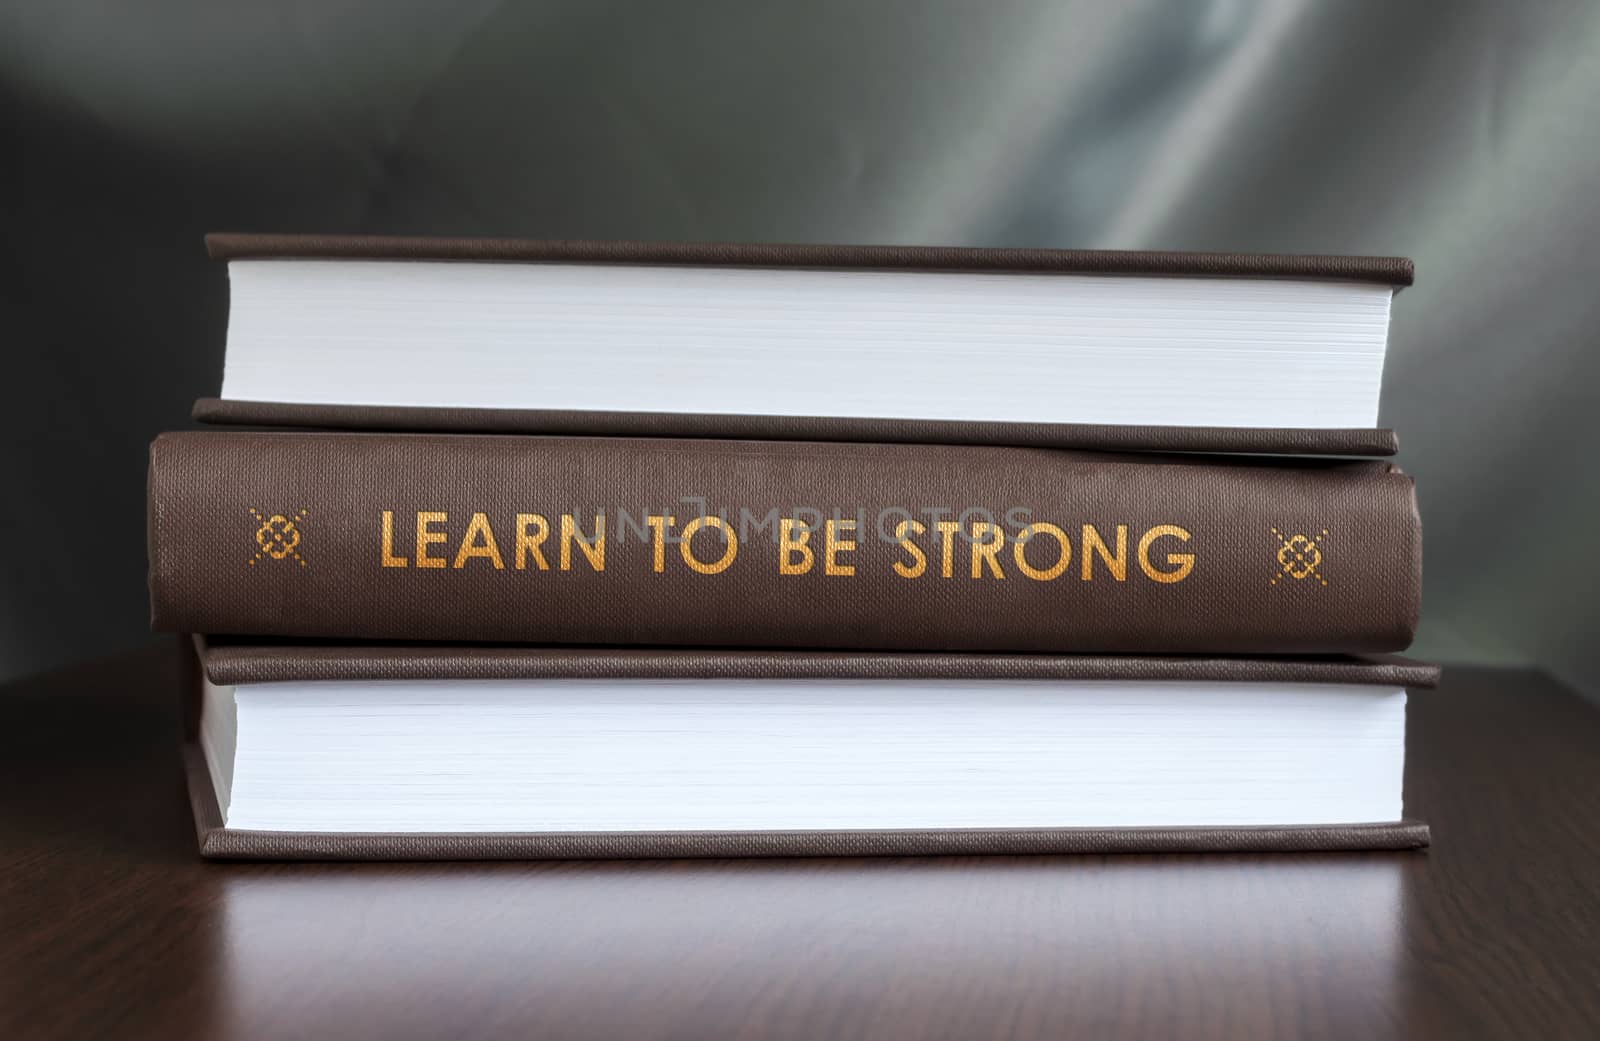 Books on a table and one with " Learn to be strong. " cover. Book concept.